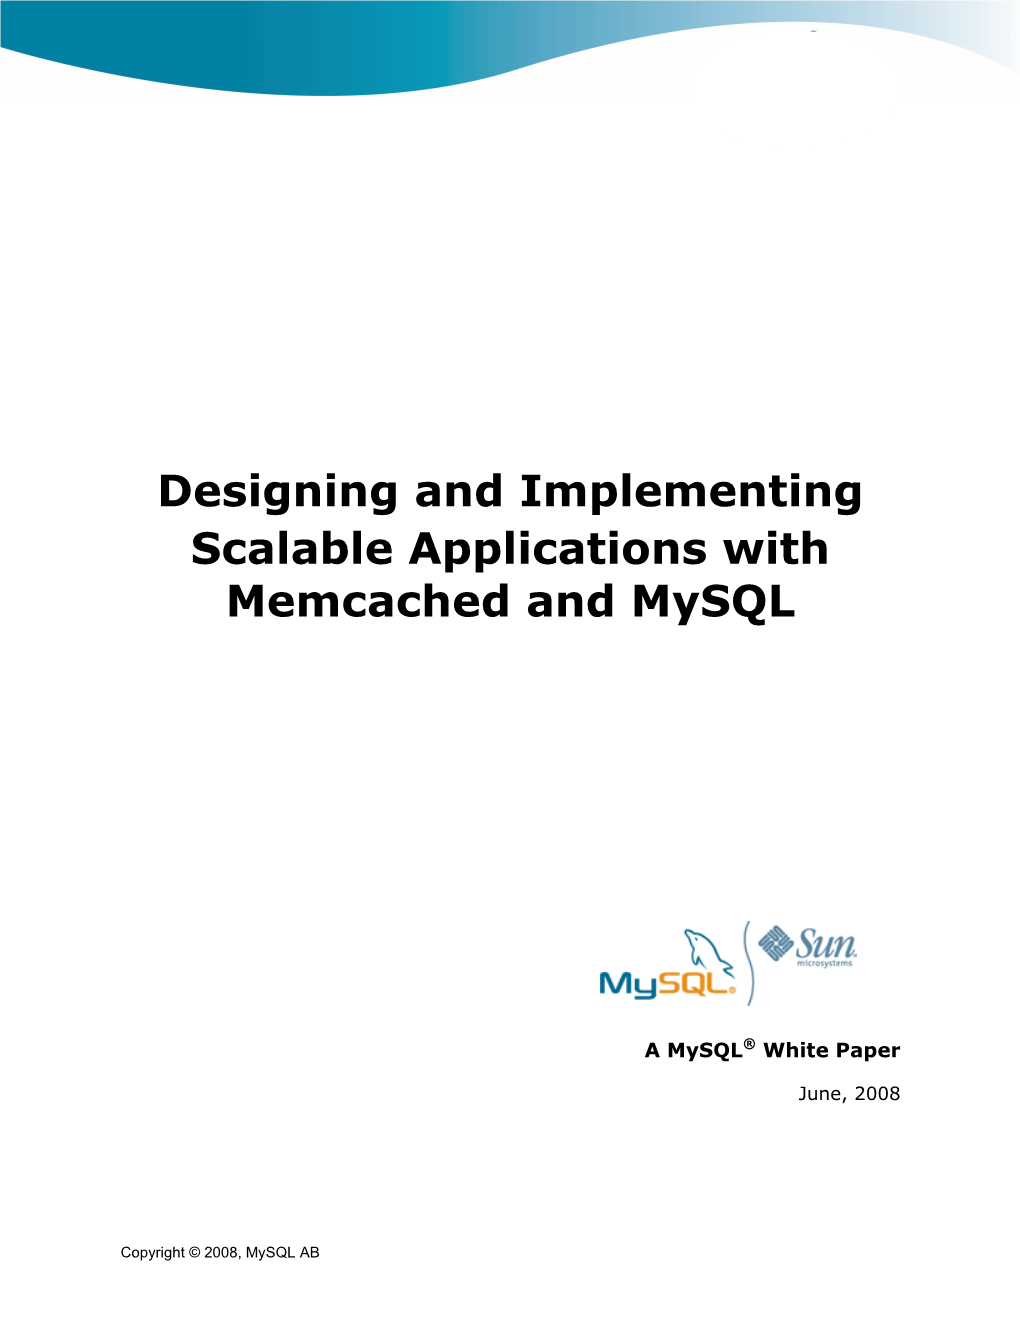 Designing and Implementing Scalable Applications with Memcached and Mysql